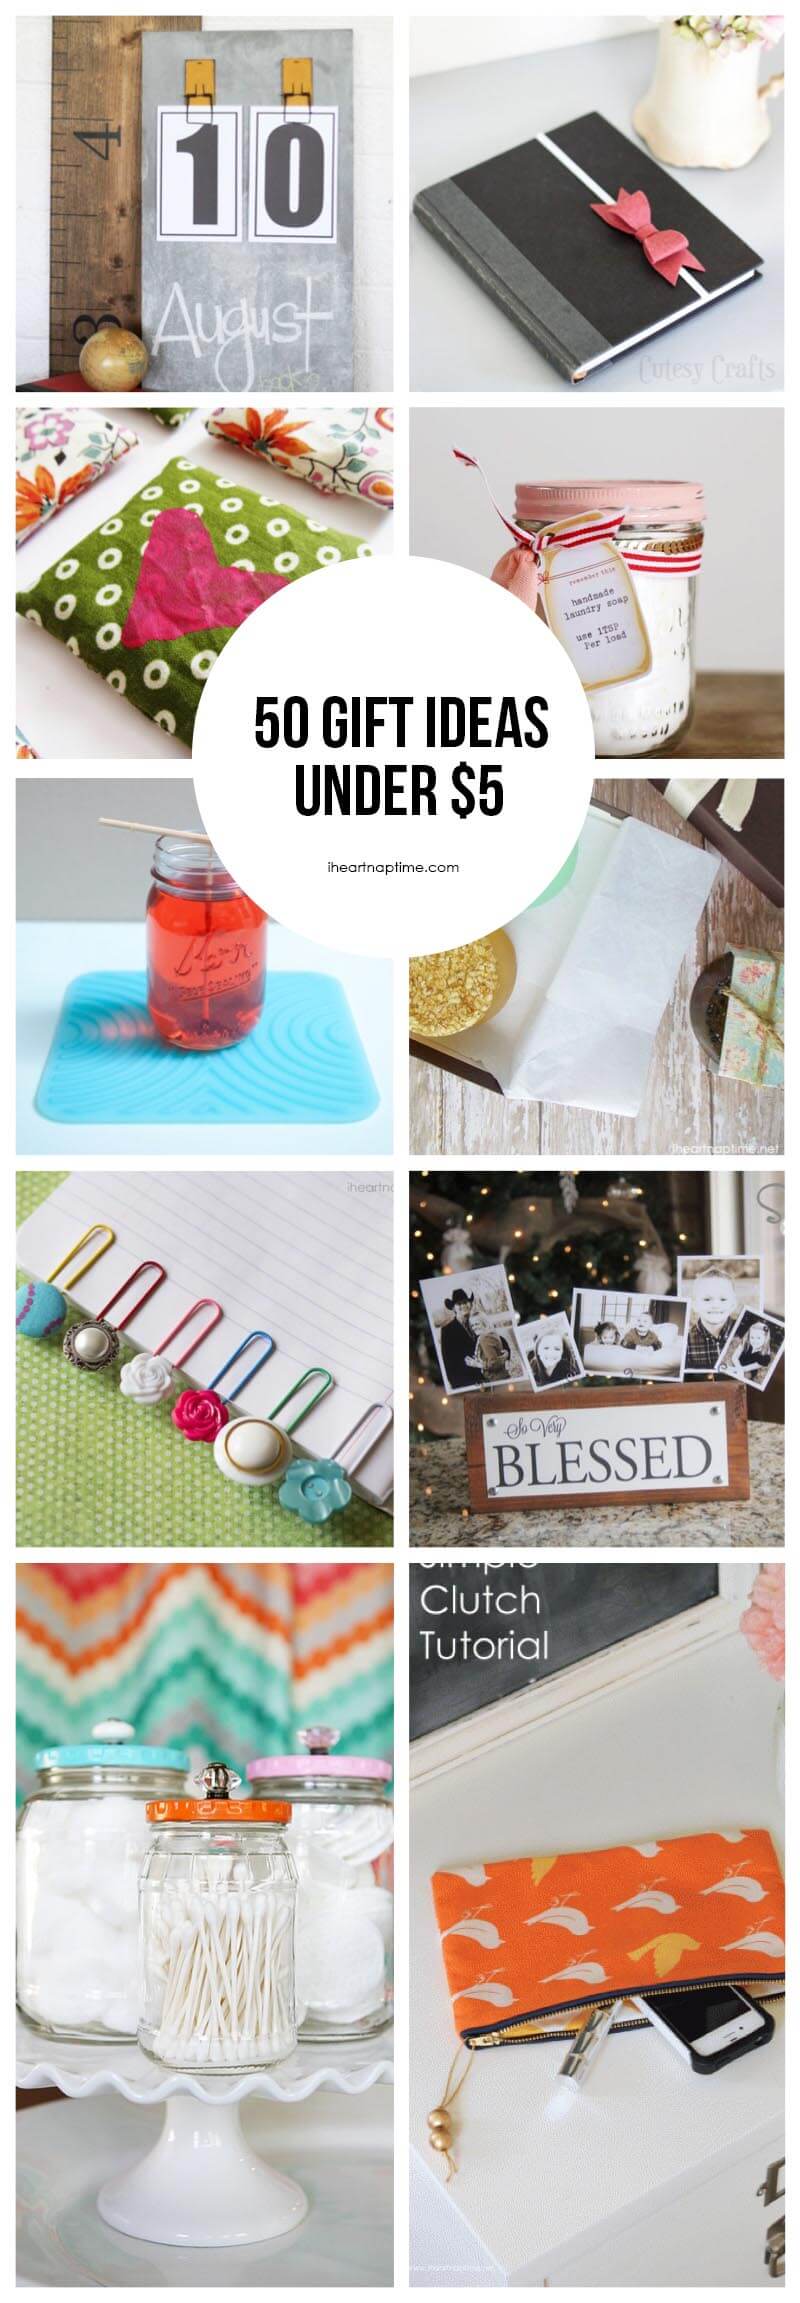 50 homemade gift ideas to make for under $5 featured on iheartnaptime.com ...love all of these ideas!